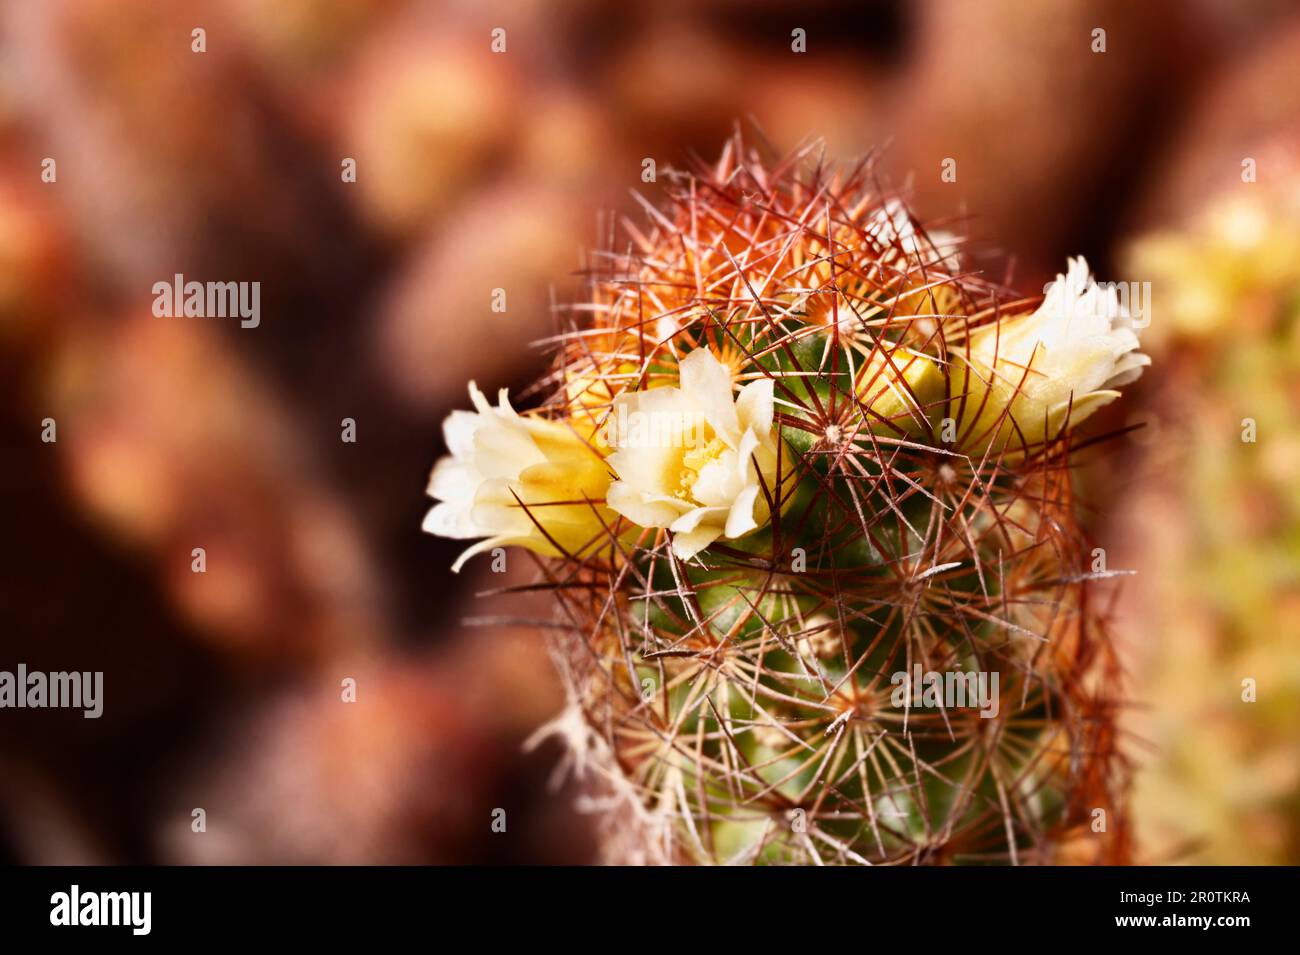 Mammillaria elongata plant -gold lace cactus  or lady finger cactus - ,plant with oval stems covered with brown spines with yellow flowers Stock Photo